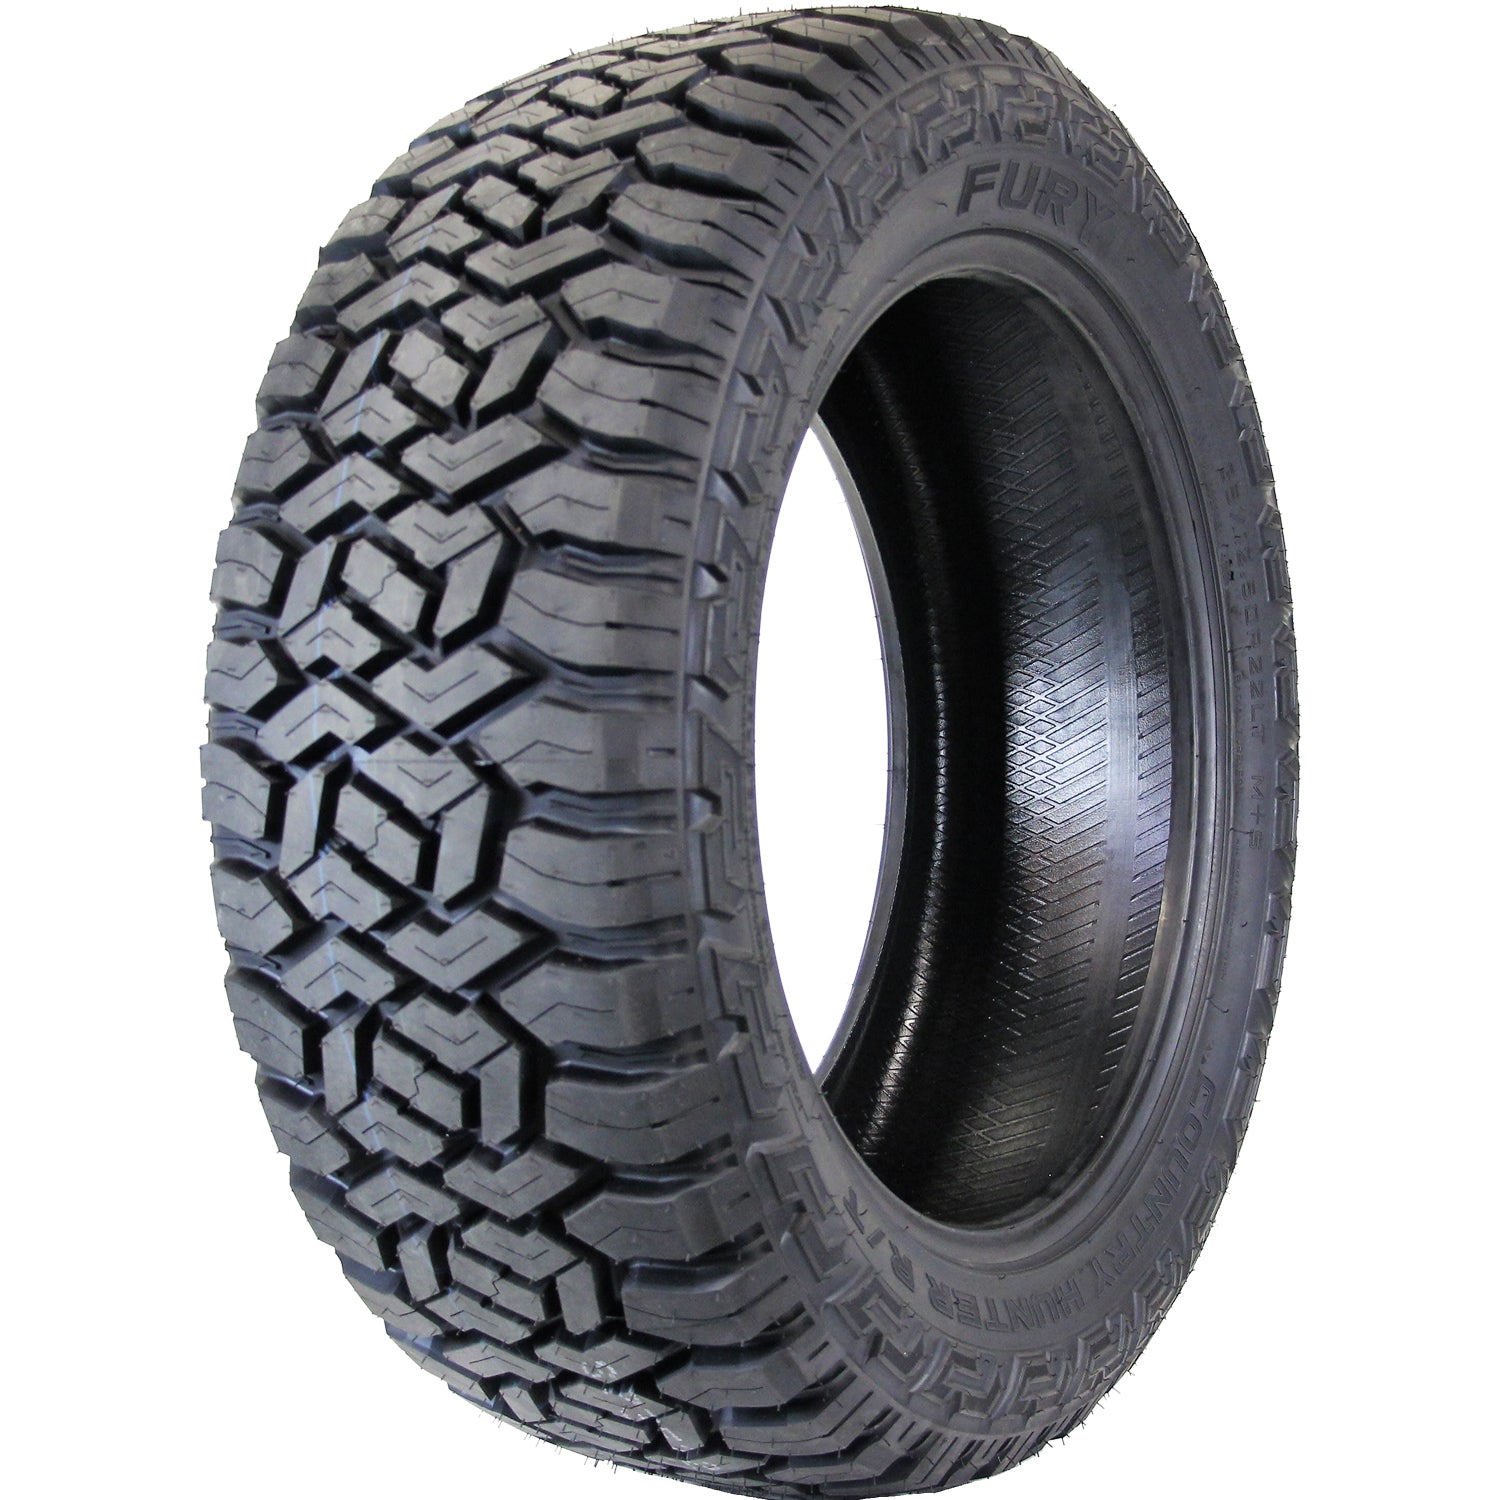 FURY OFFROAD COUNTRY HUNTER RT 33X12.50R17LT Tires